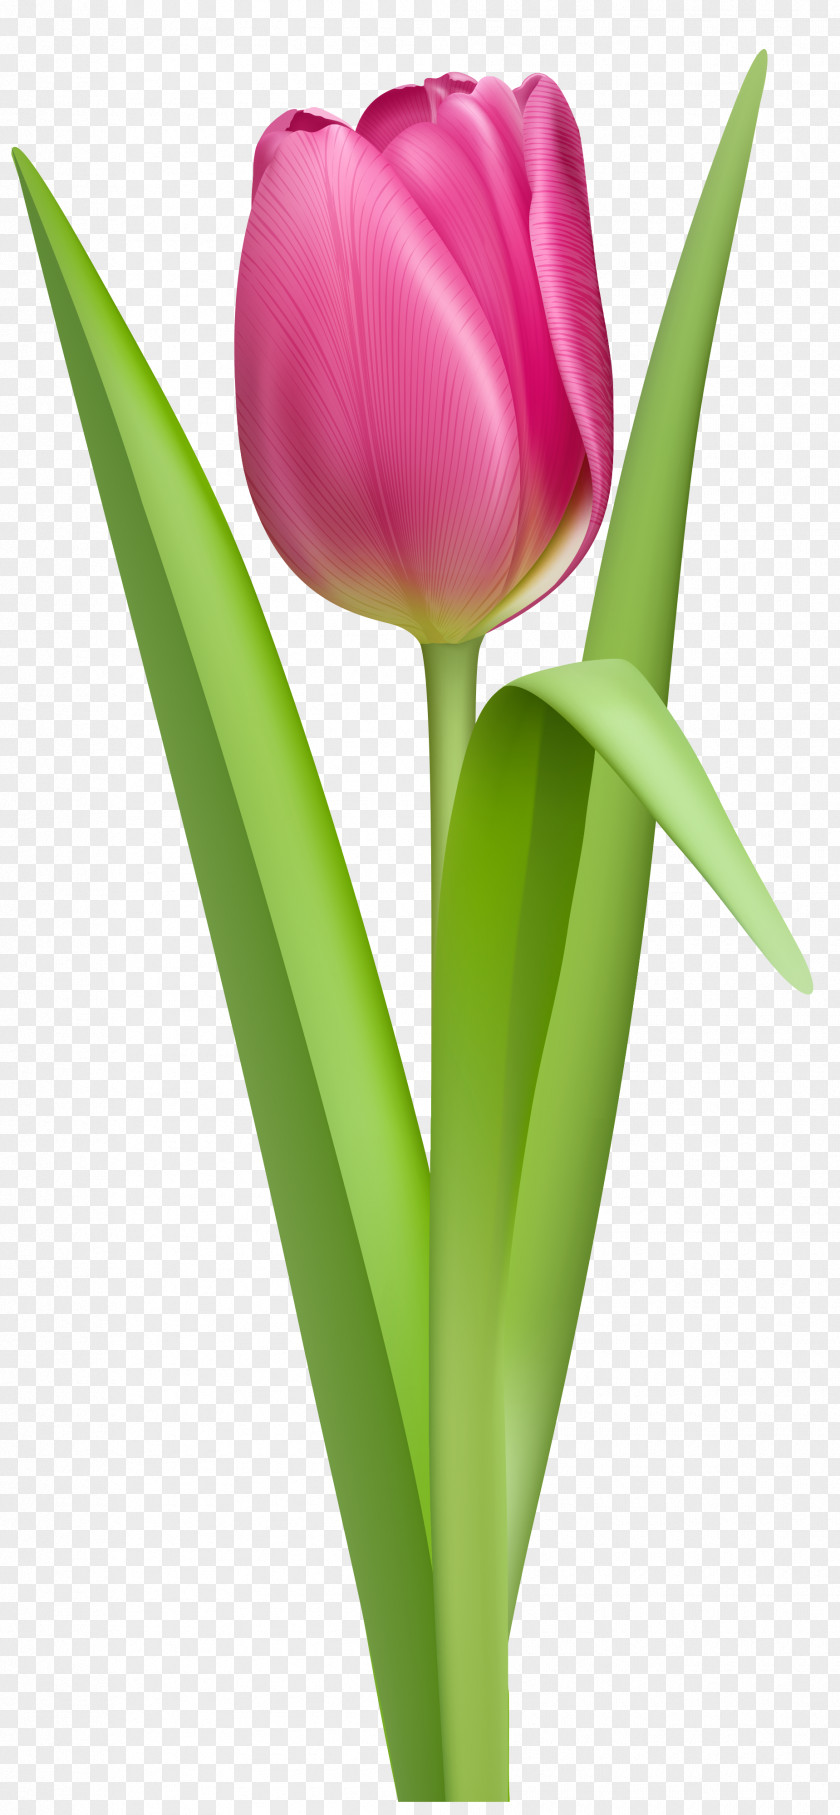 Tulip The Tulip: Story Of A Flower That Has Made Men Mad Clip Art PNG